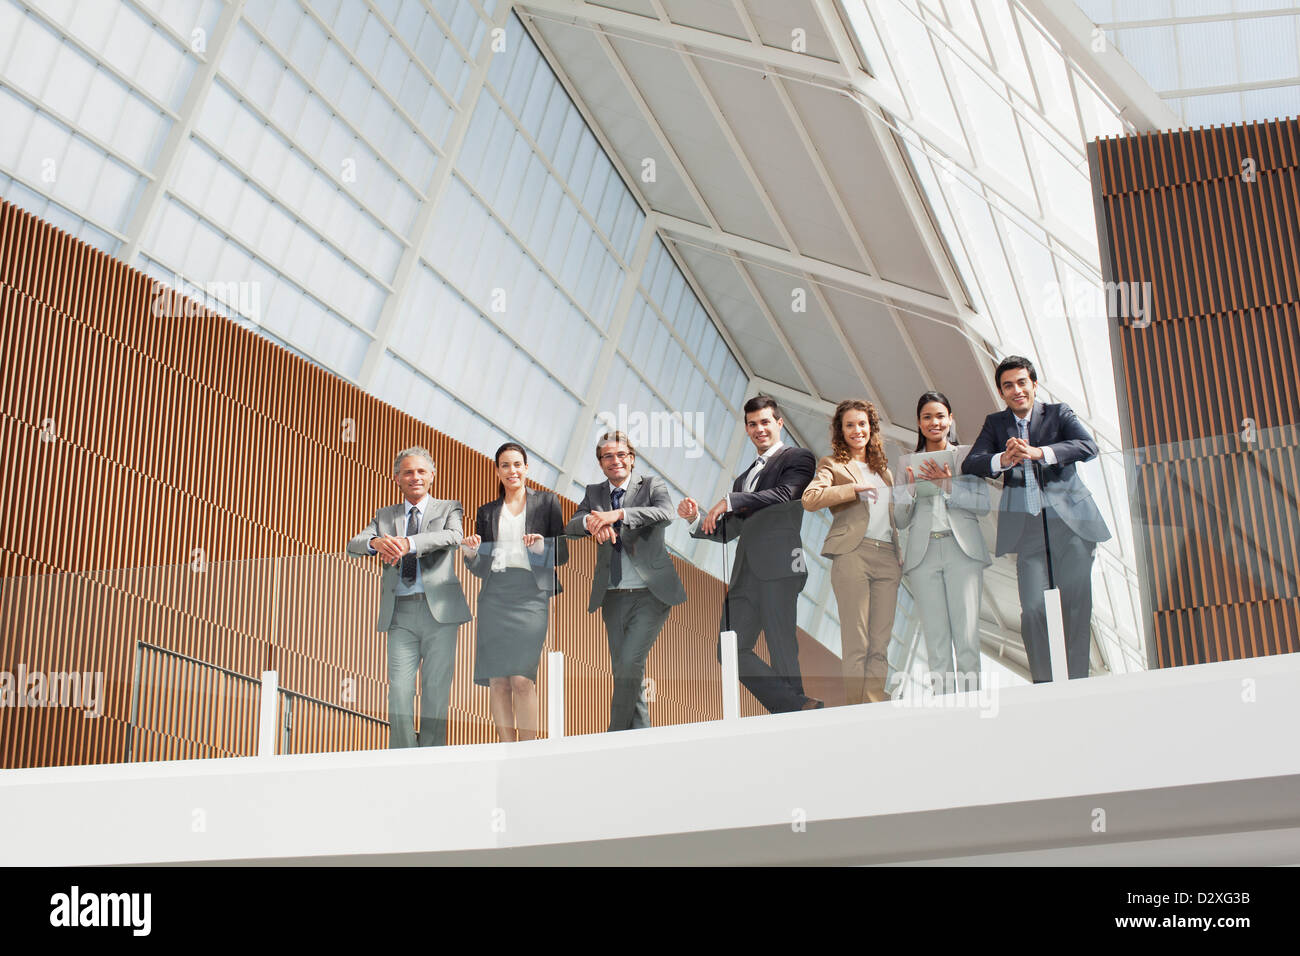 Portrait of smiling business people leaning on balcony railing Stock Photo